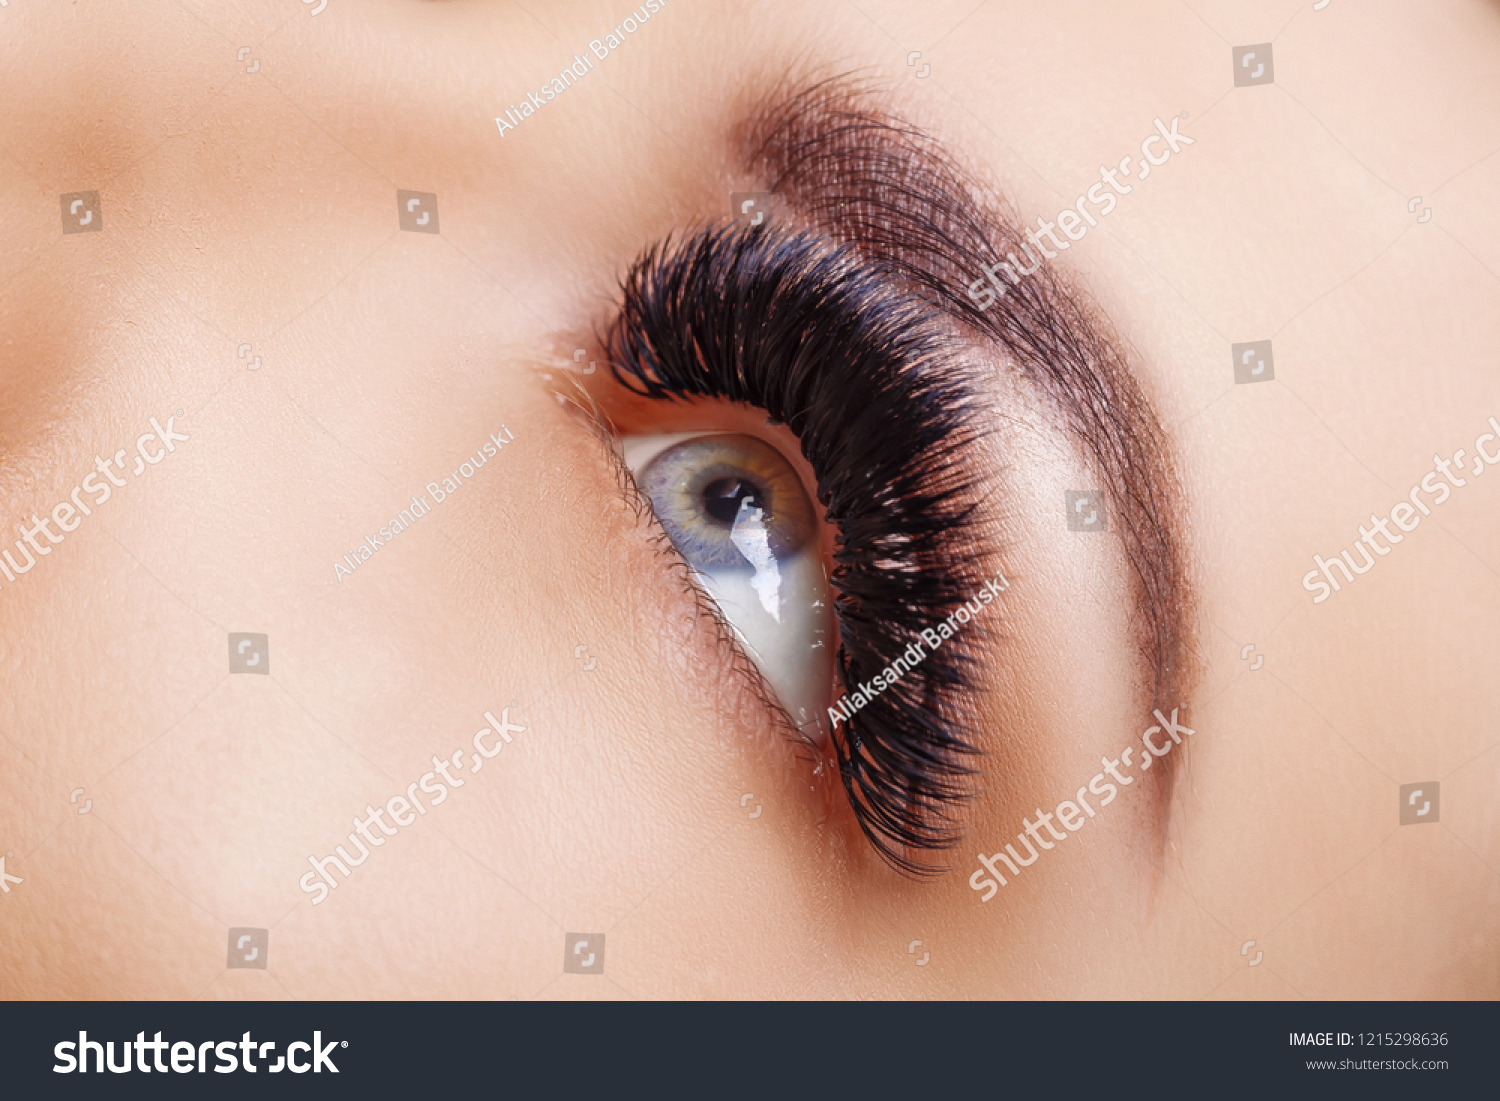 Eyelash Extension Procedure. Woman Eye with Long Eyelashes. Close up, selective focus. Hollywood, russian volume #1215298636